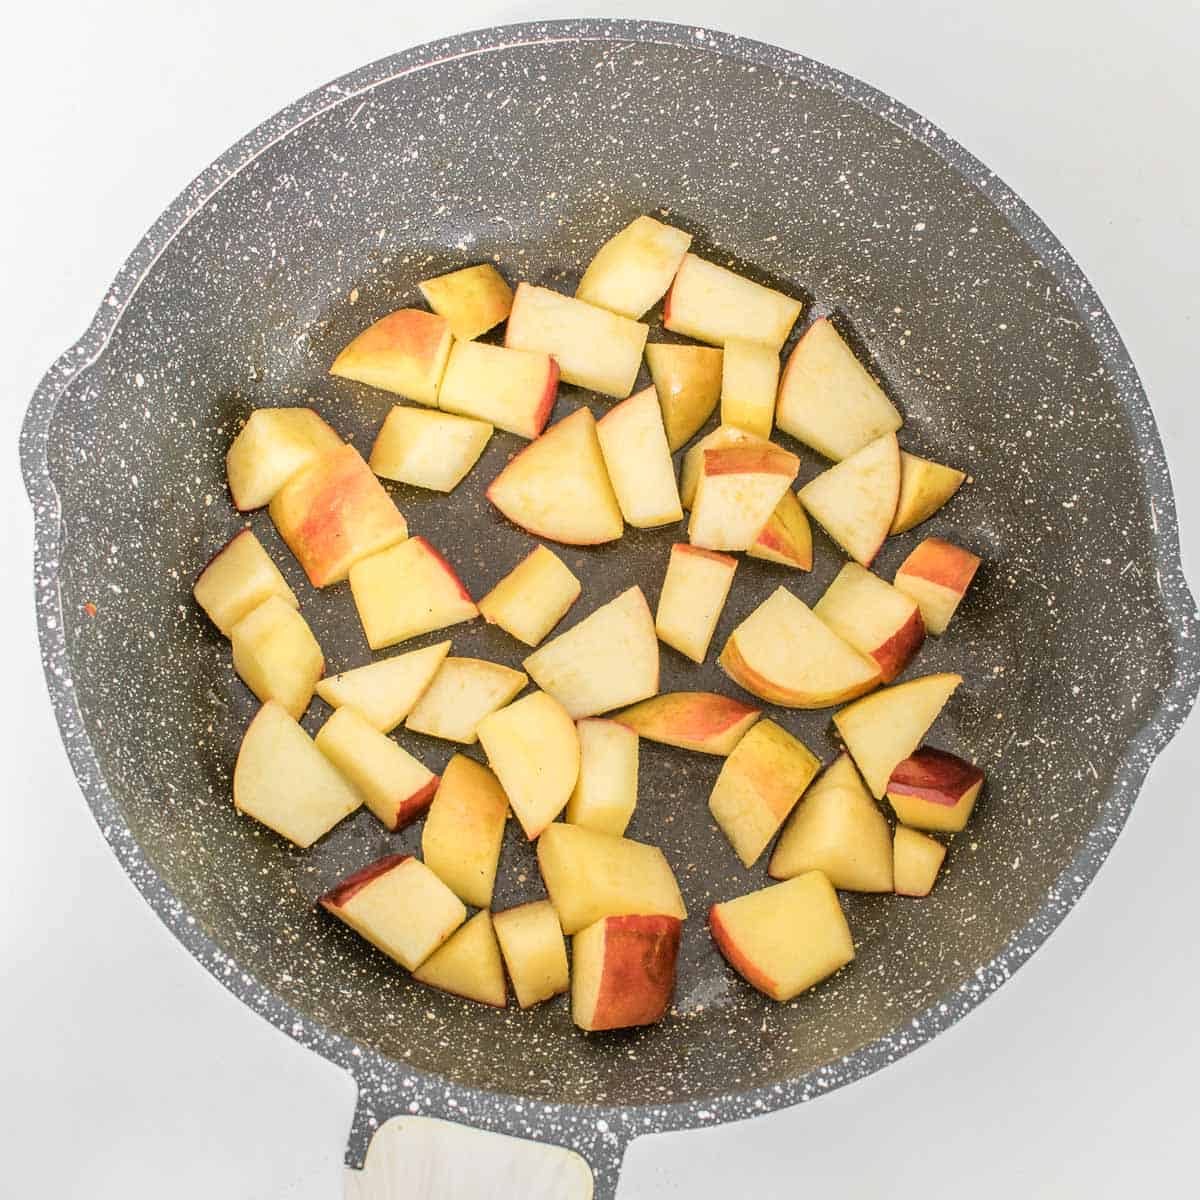 sauteed apples in a pan.